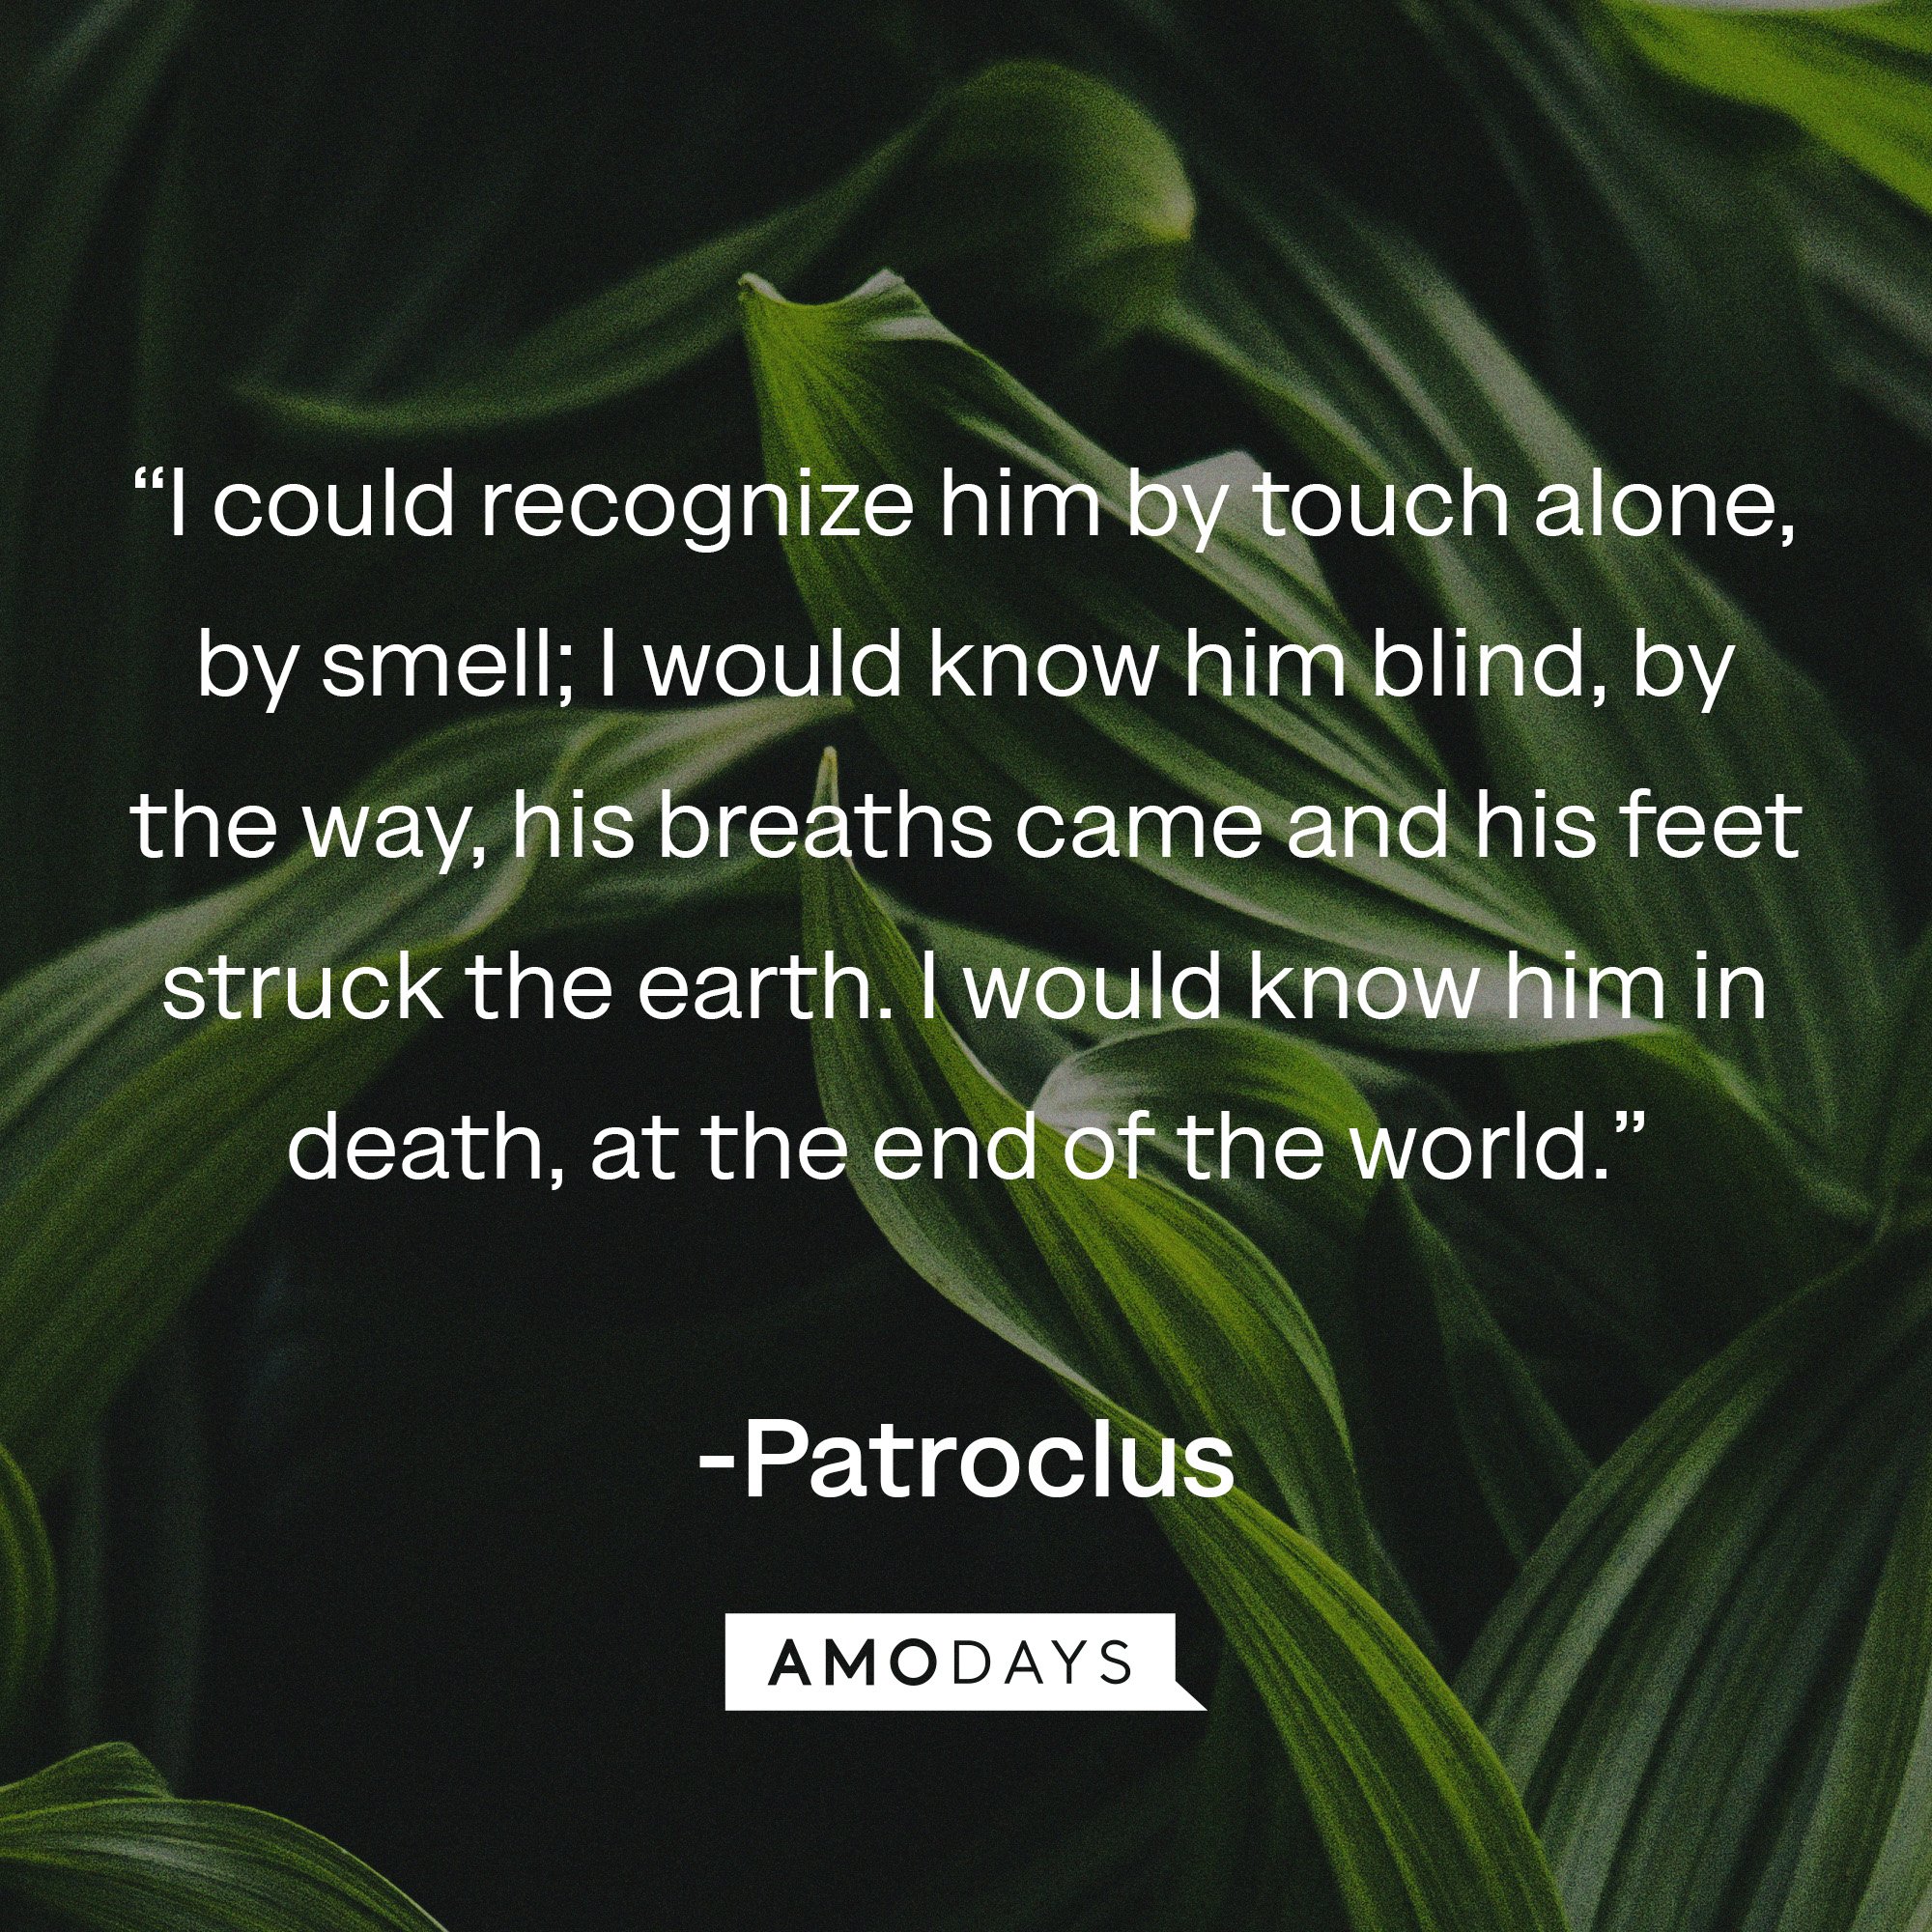  Patroclus's quote: “I could recognize him by touch alone, by smell; I would know him blind, by the way, his breaths came and his feet struck the earth. I would know him in death, at the end of the world.” | Image: AmoDays